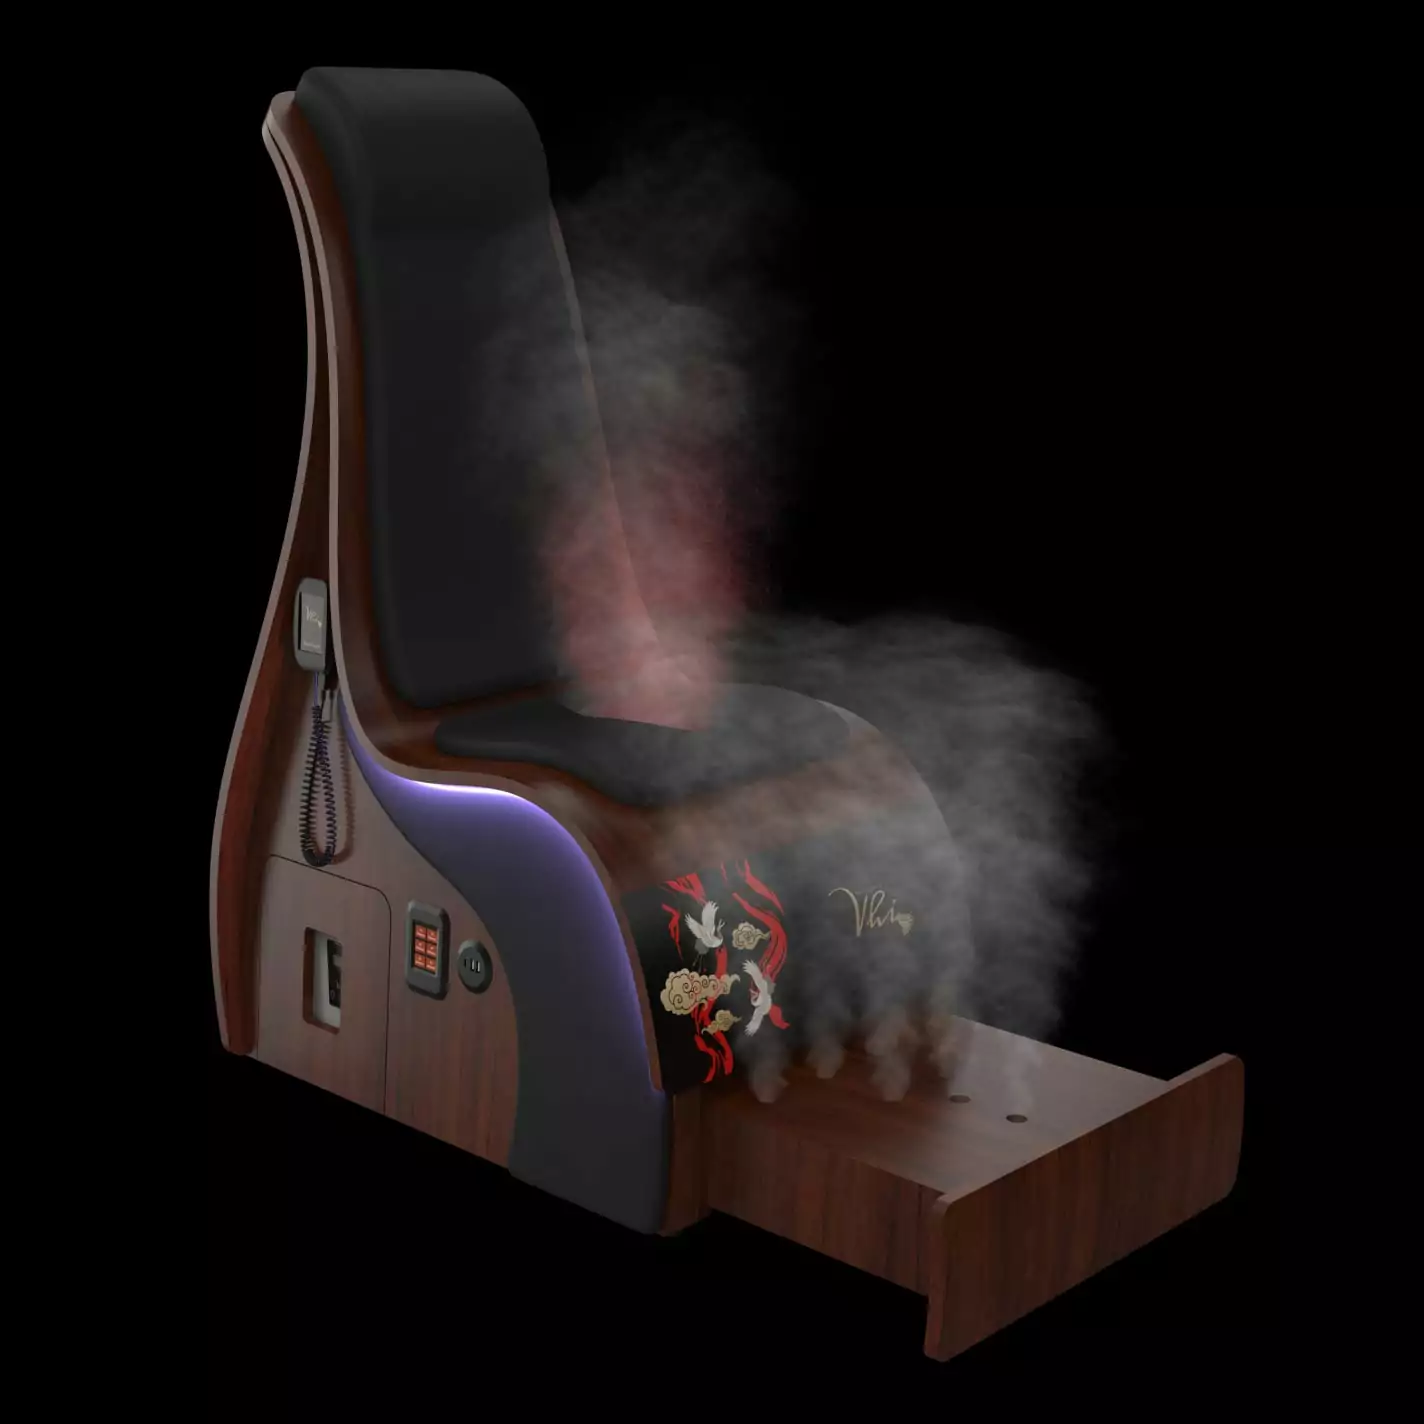 STEAM THERAPY VHISTEAM THRONE